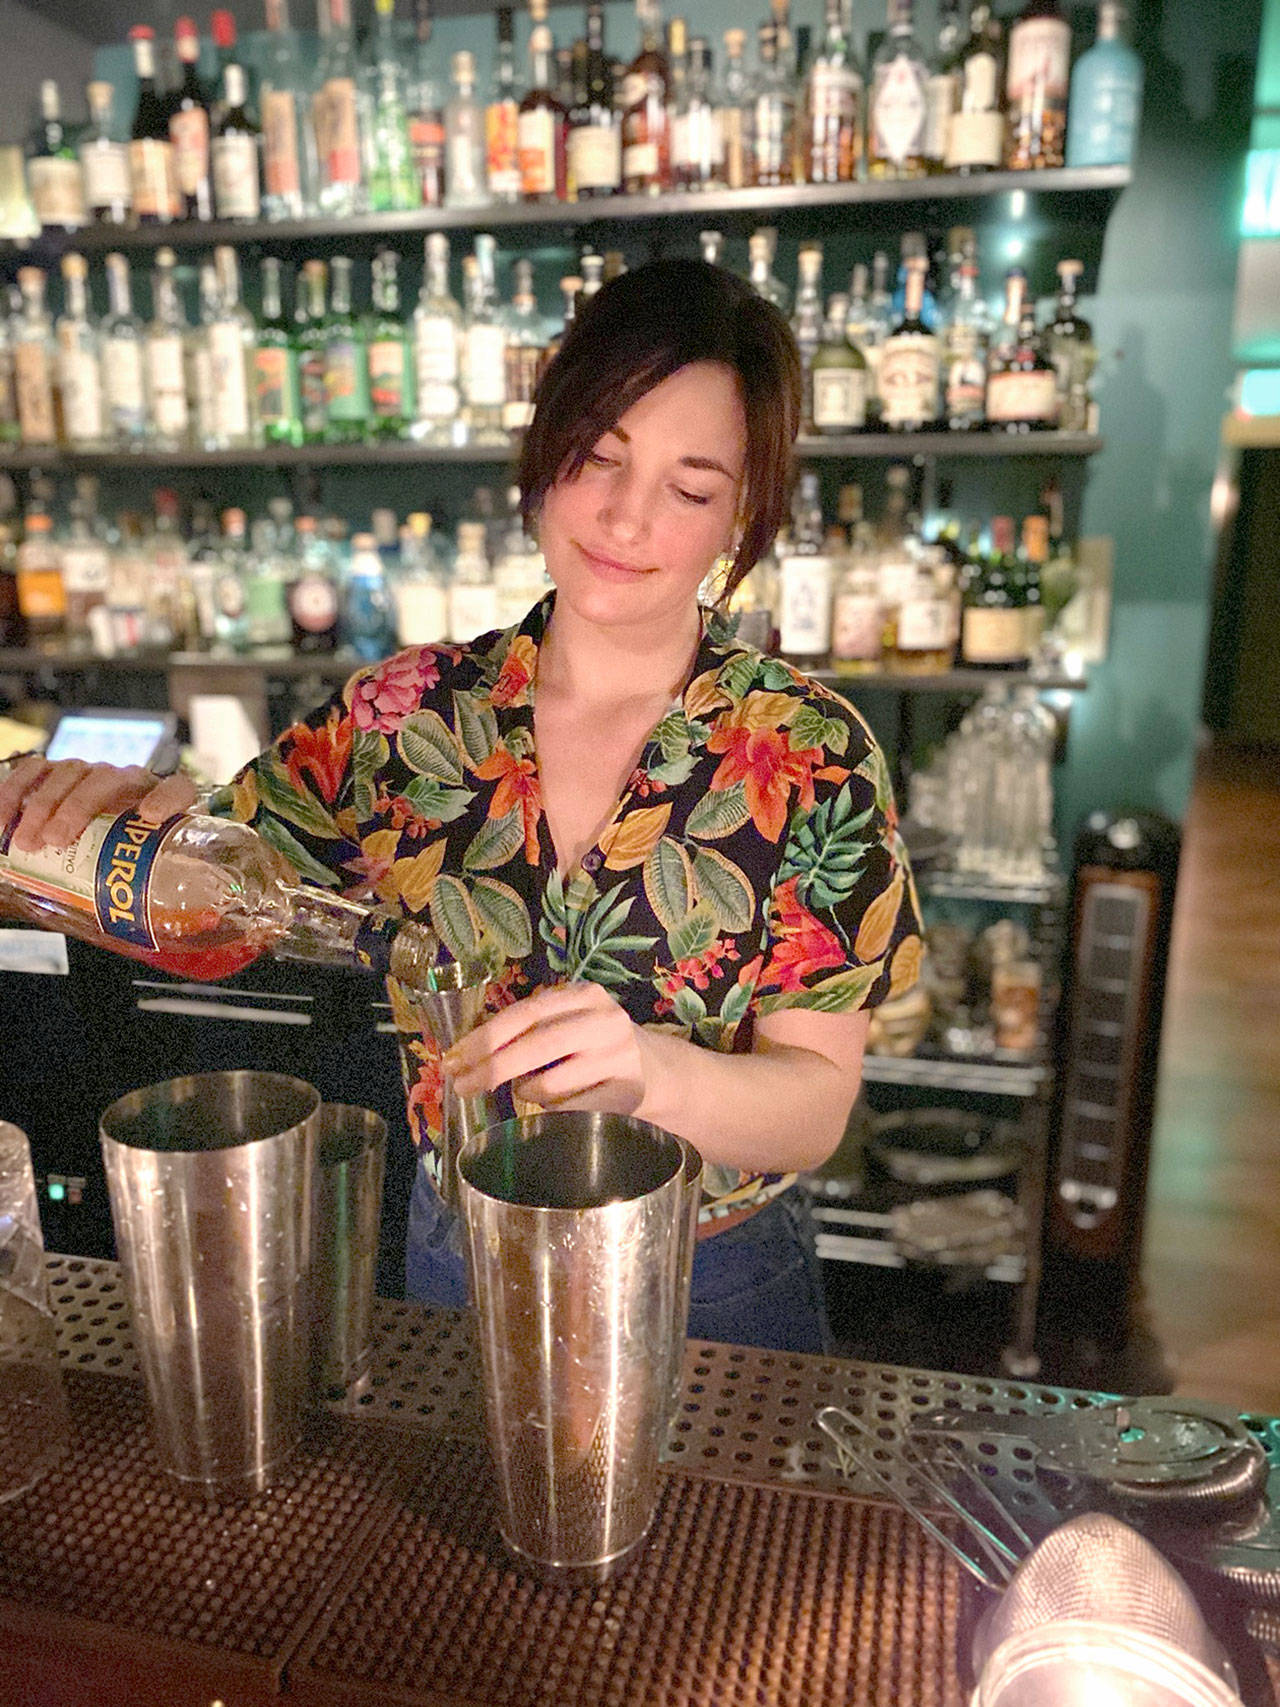 Sophia Elan, a co-manager and bartender of The In Between in Port Townsend, pours a drink while she works a shift prior to COVID-19 restrictions. Elan will represent The In Between bar crew by participating in an Instagram livestream event by PUNCH, which will donate $1,000 that will be split between the crew members. (Toby Warren)